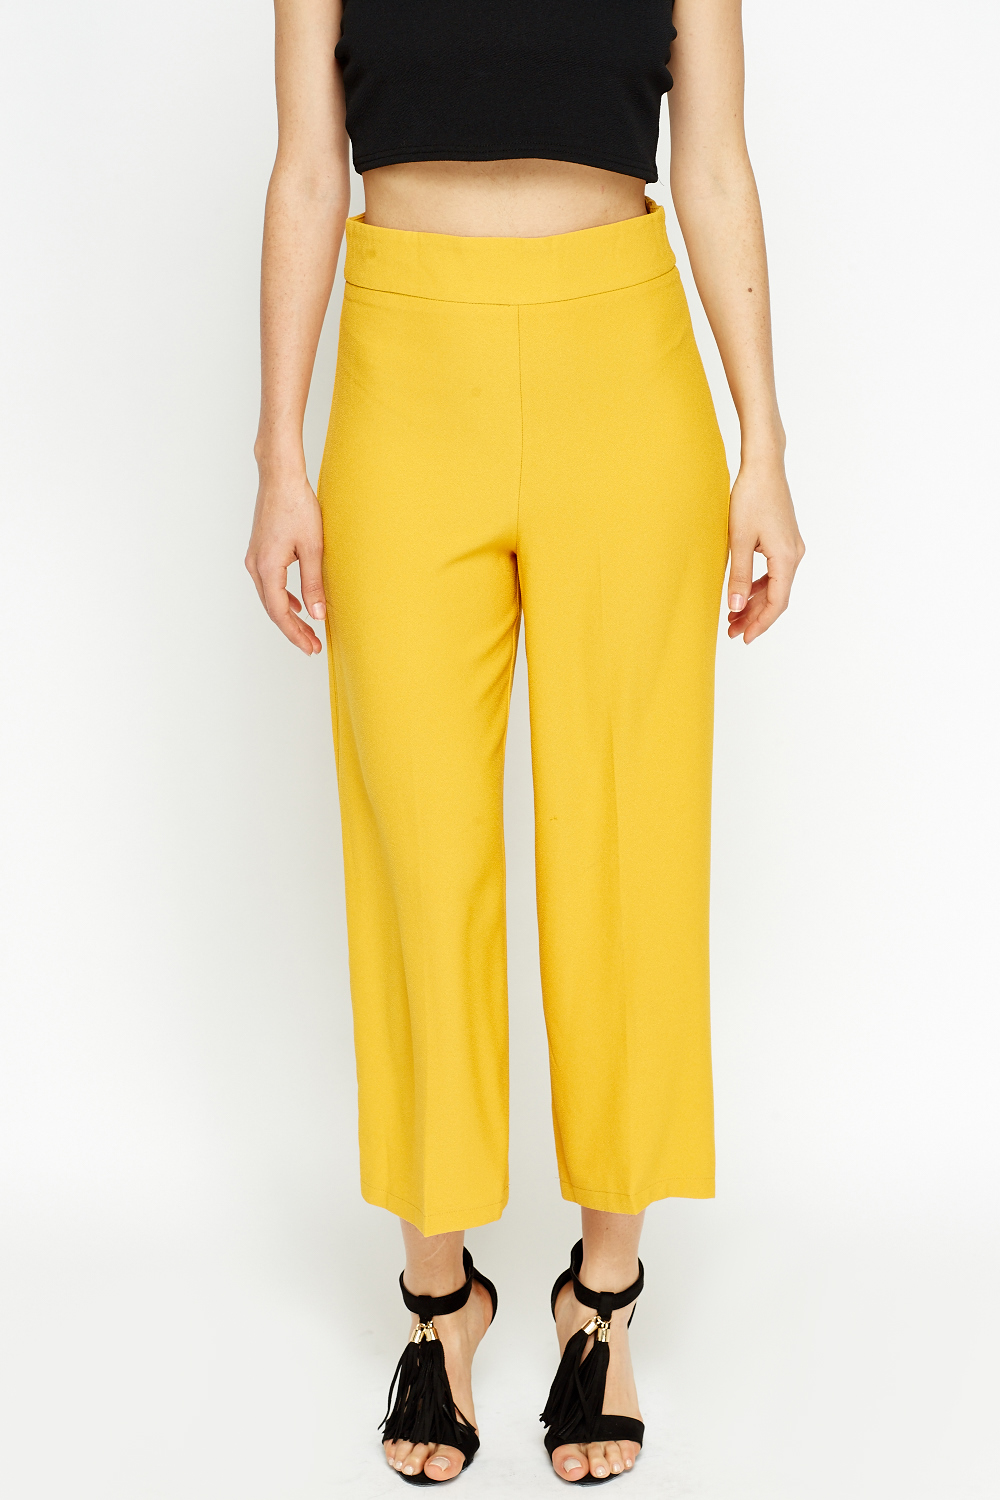 High Waisted Mustard Trousers - Just $7